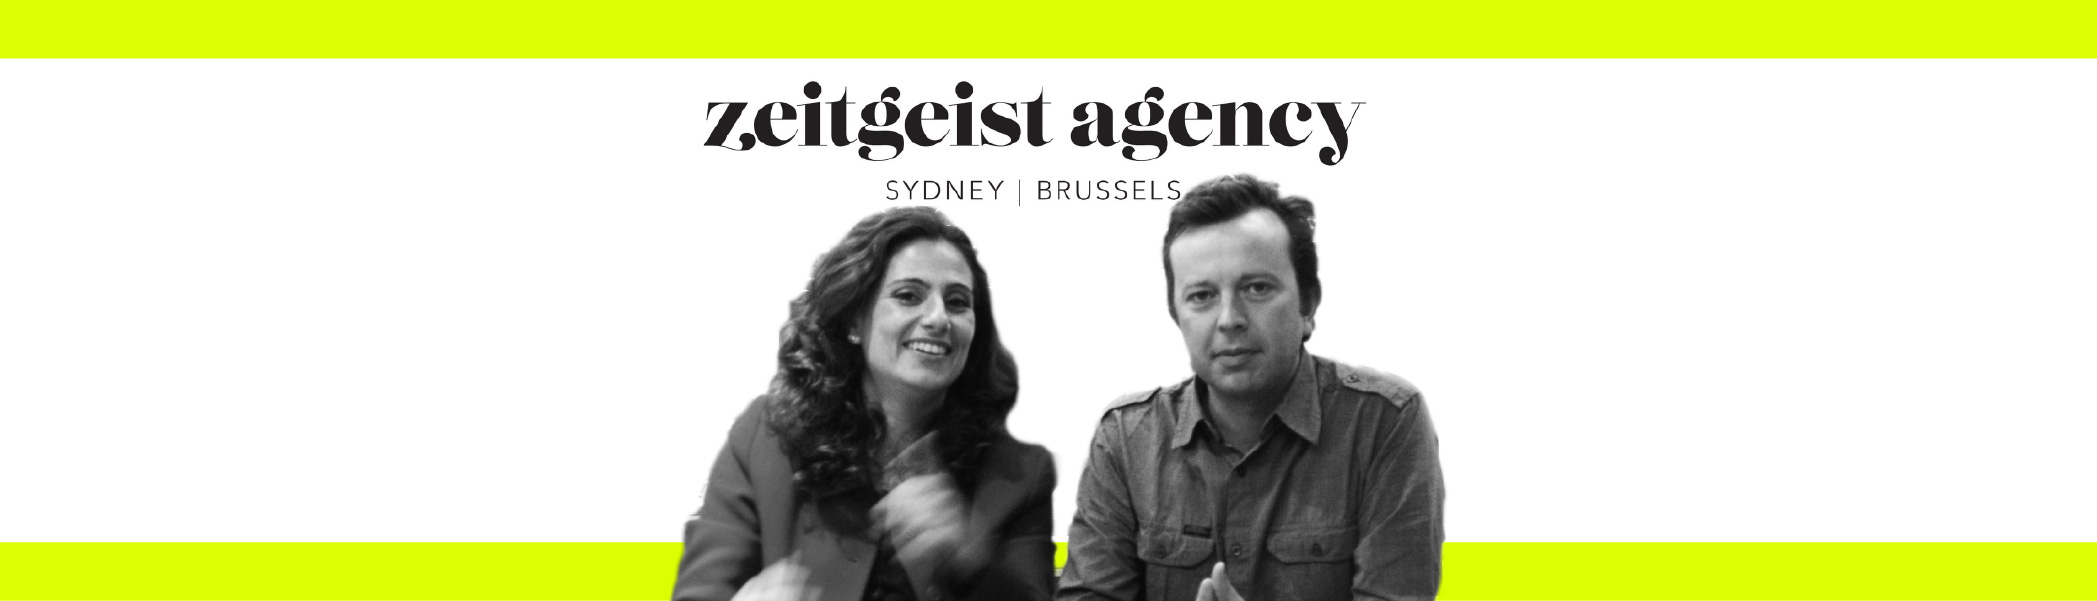 Zeitgeist founders: agency gives more transparency and focus to work on the book